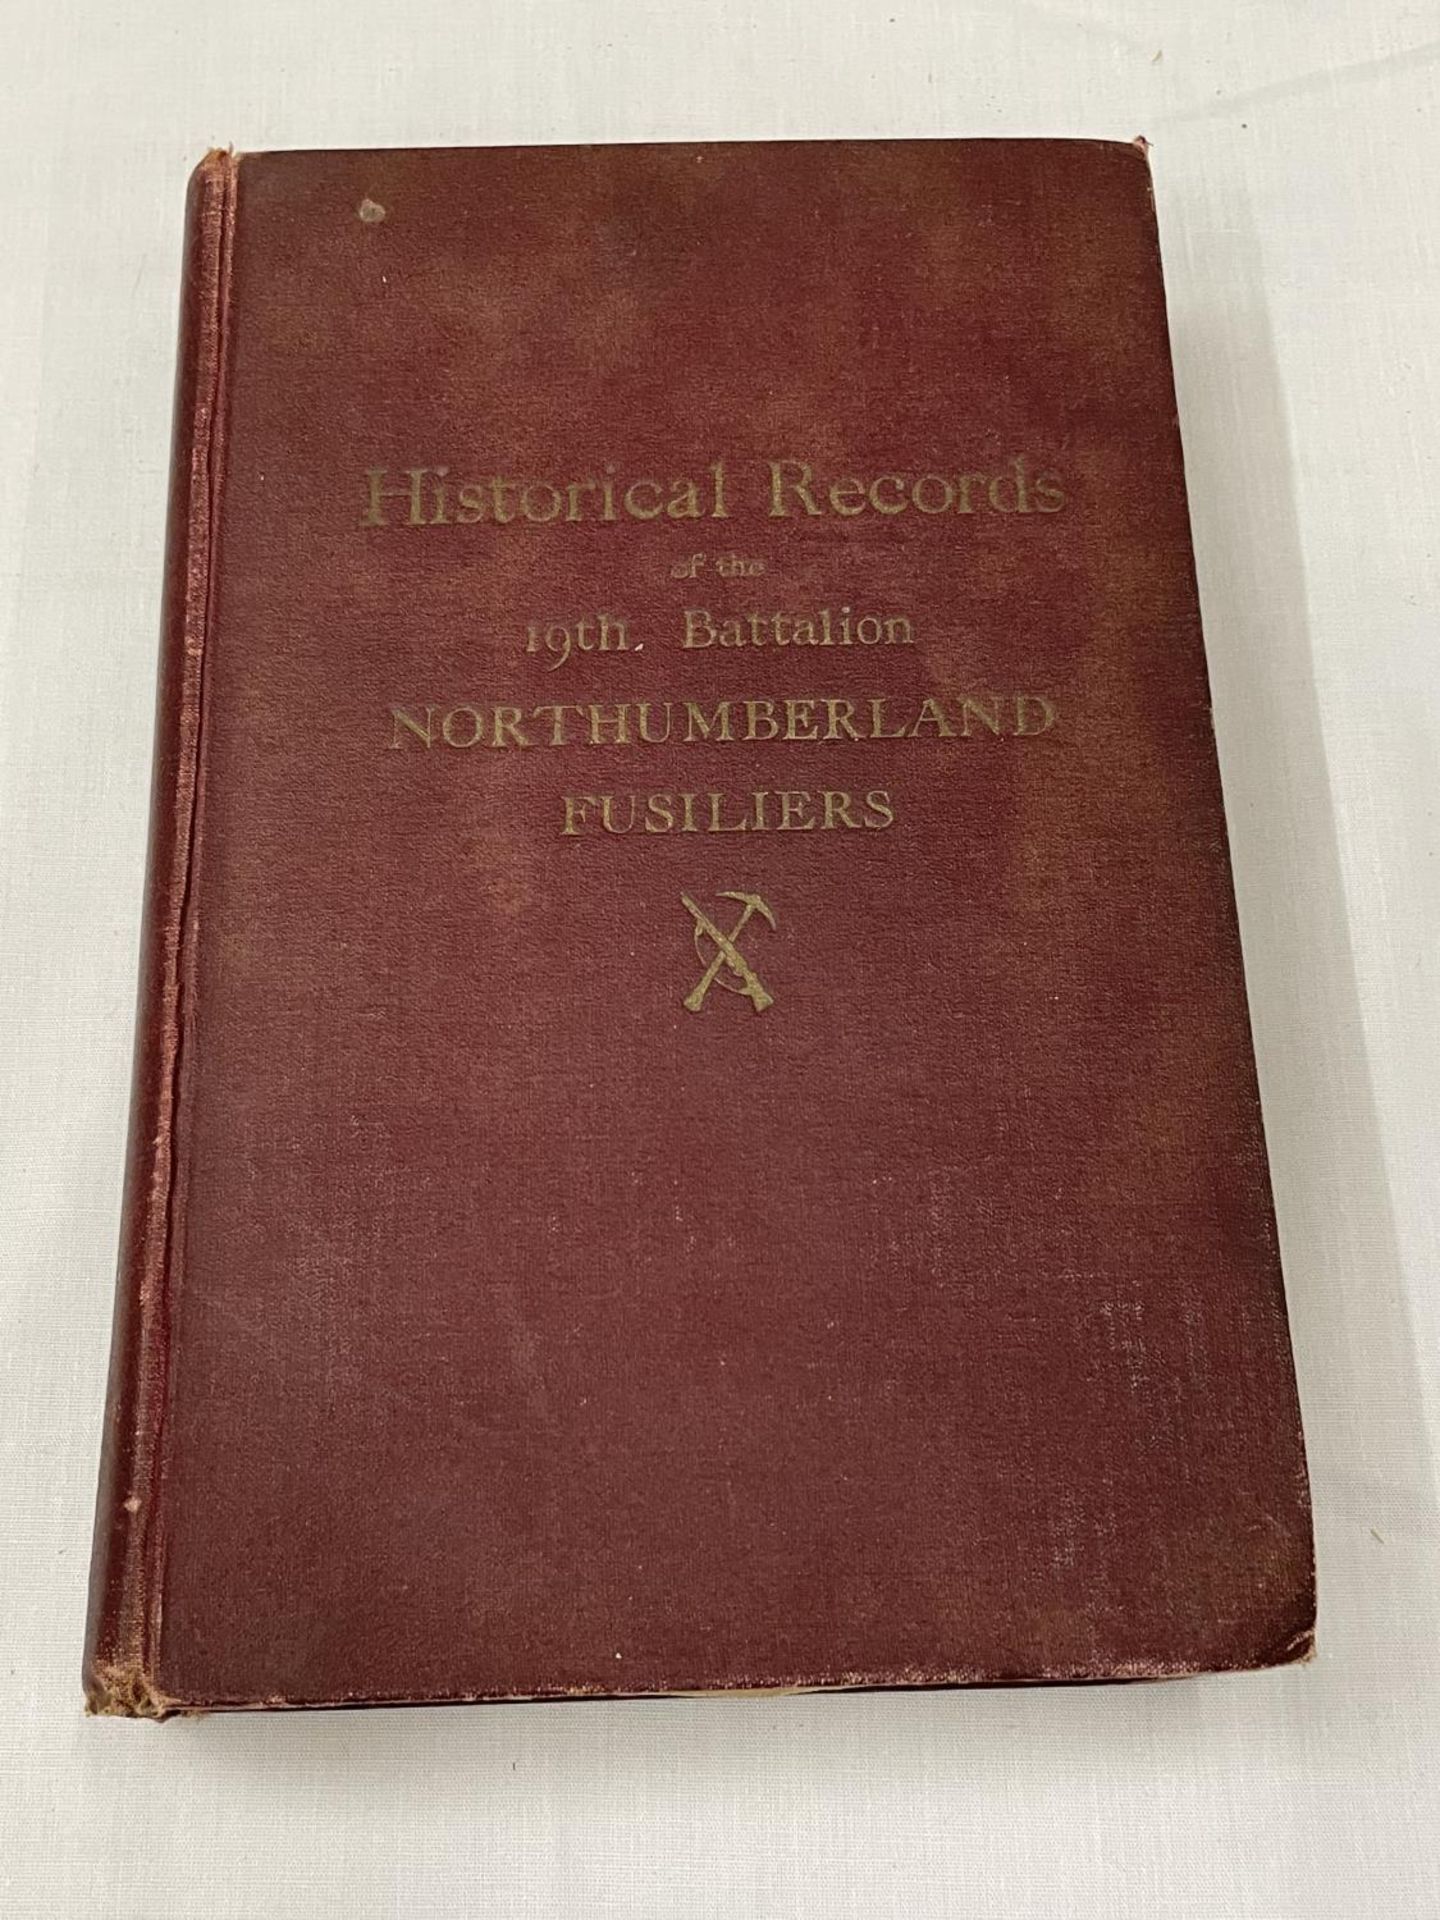 A COPY OF HISTORICAL RECORDS OF THE 19TH BATTALION NORTHUMBERLAND FUSILIERS